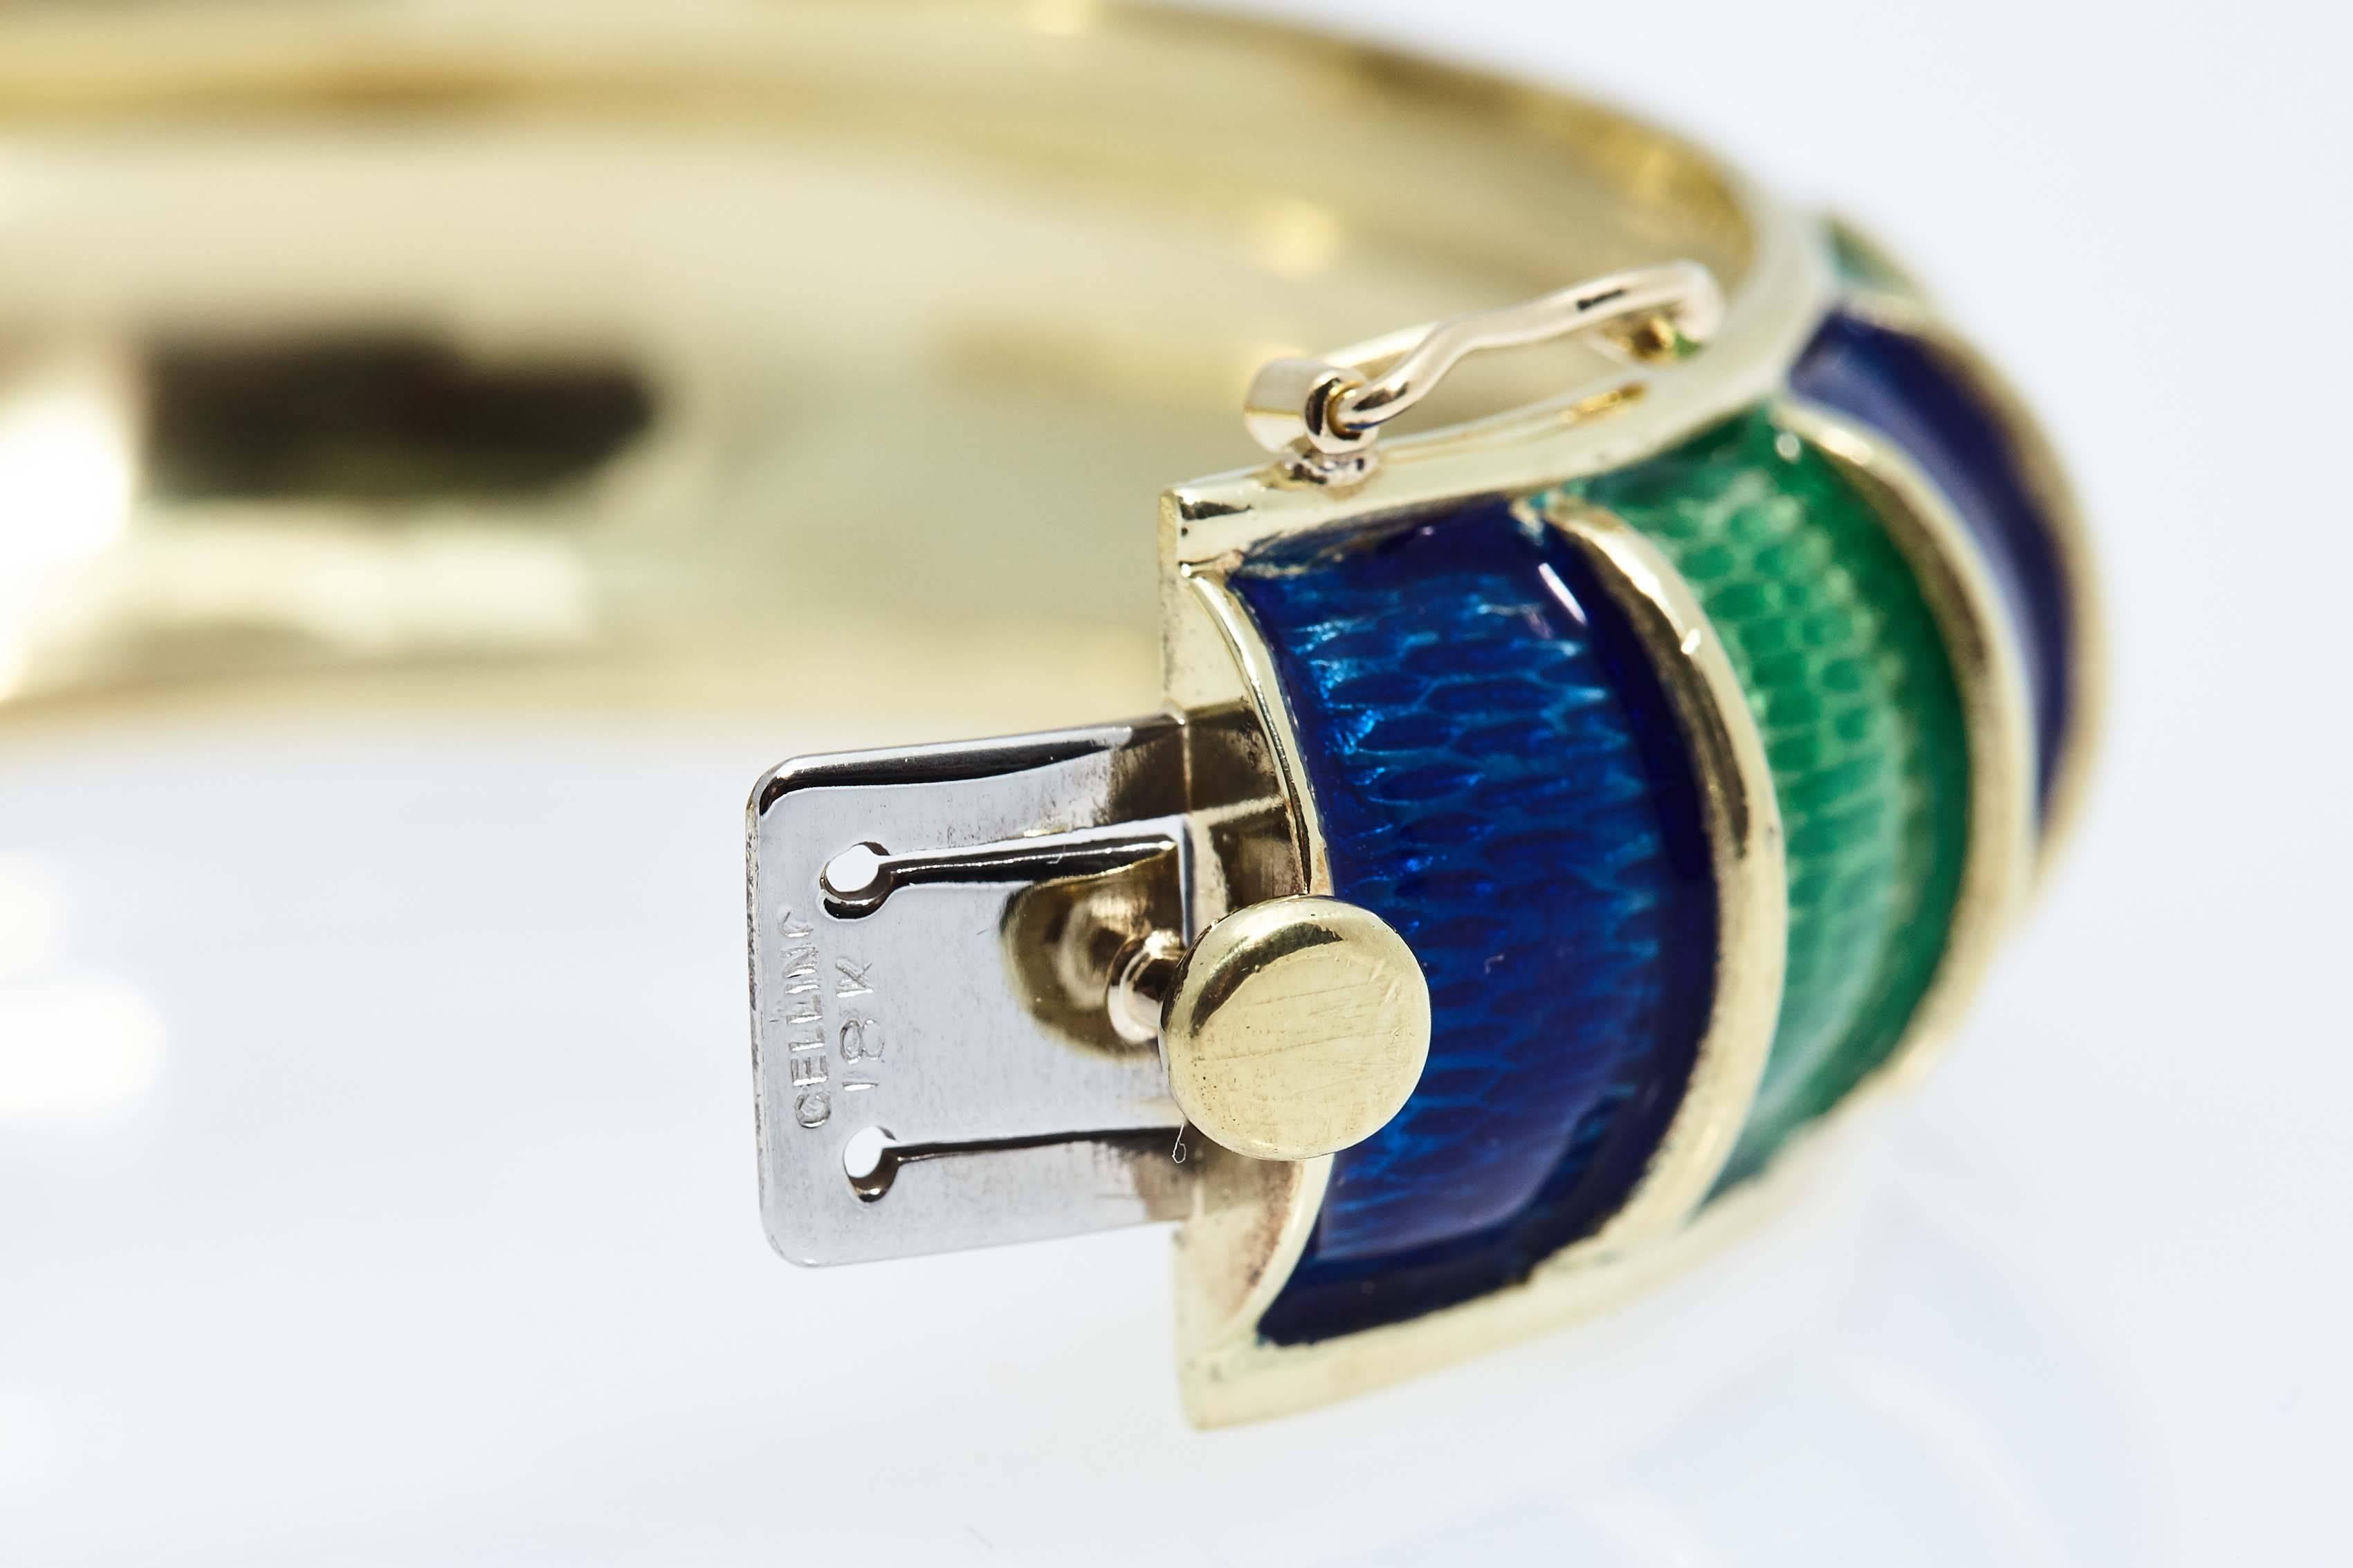 Cellino Blue and Green Enamel Gold Bangle Bracelet In Good Condition For Sale In New York, NY